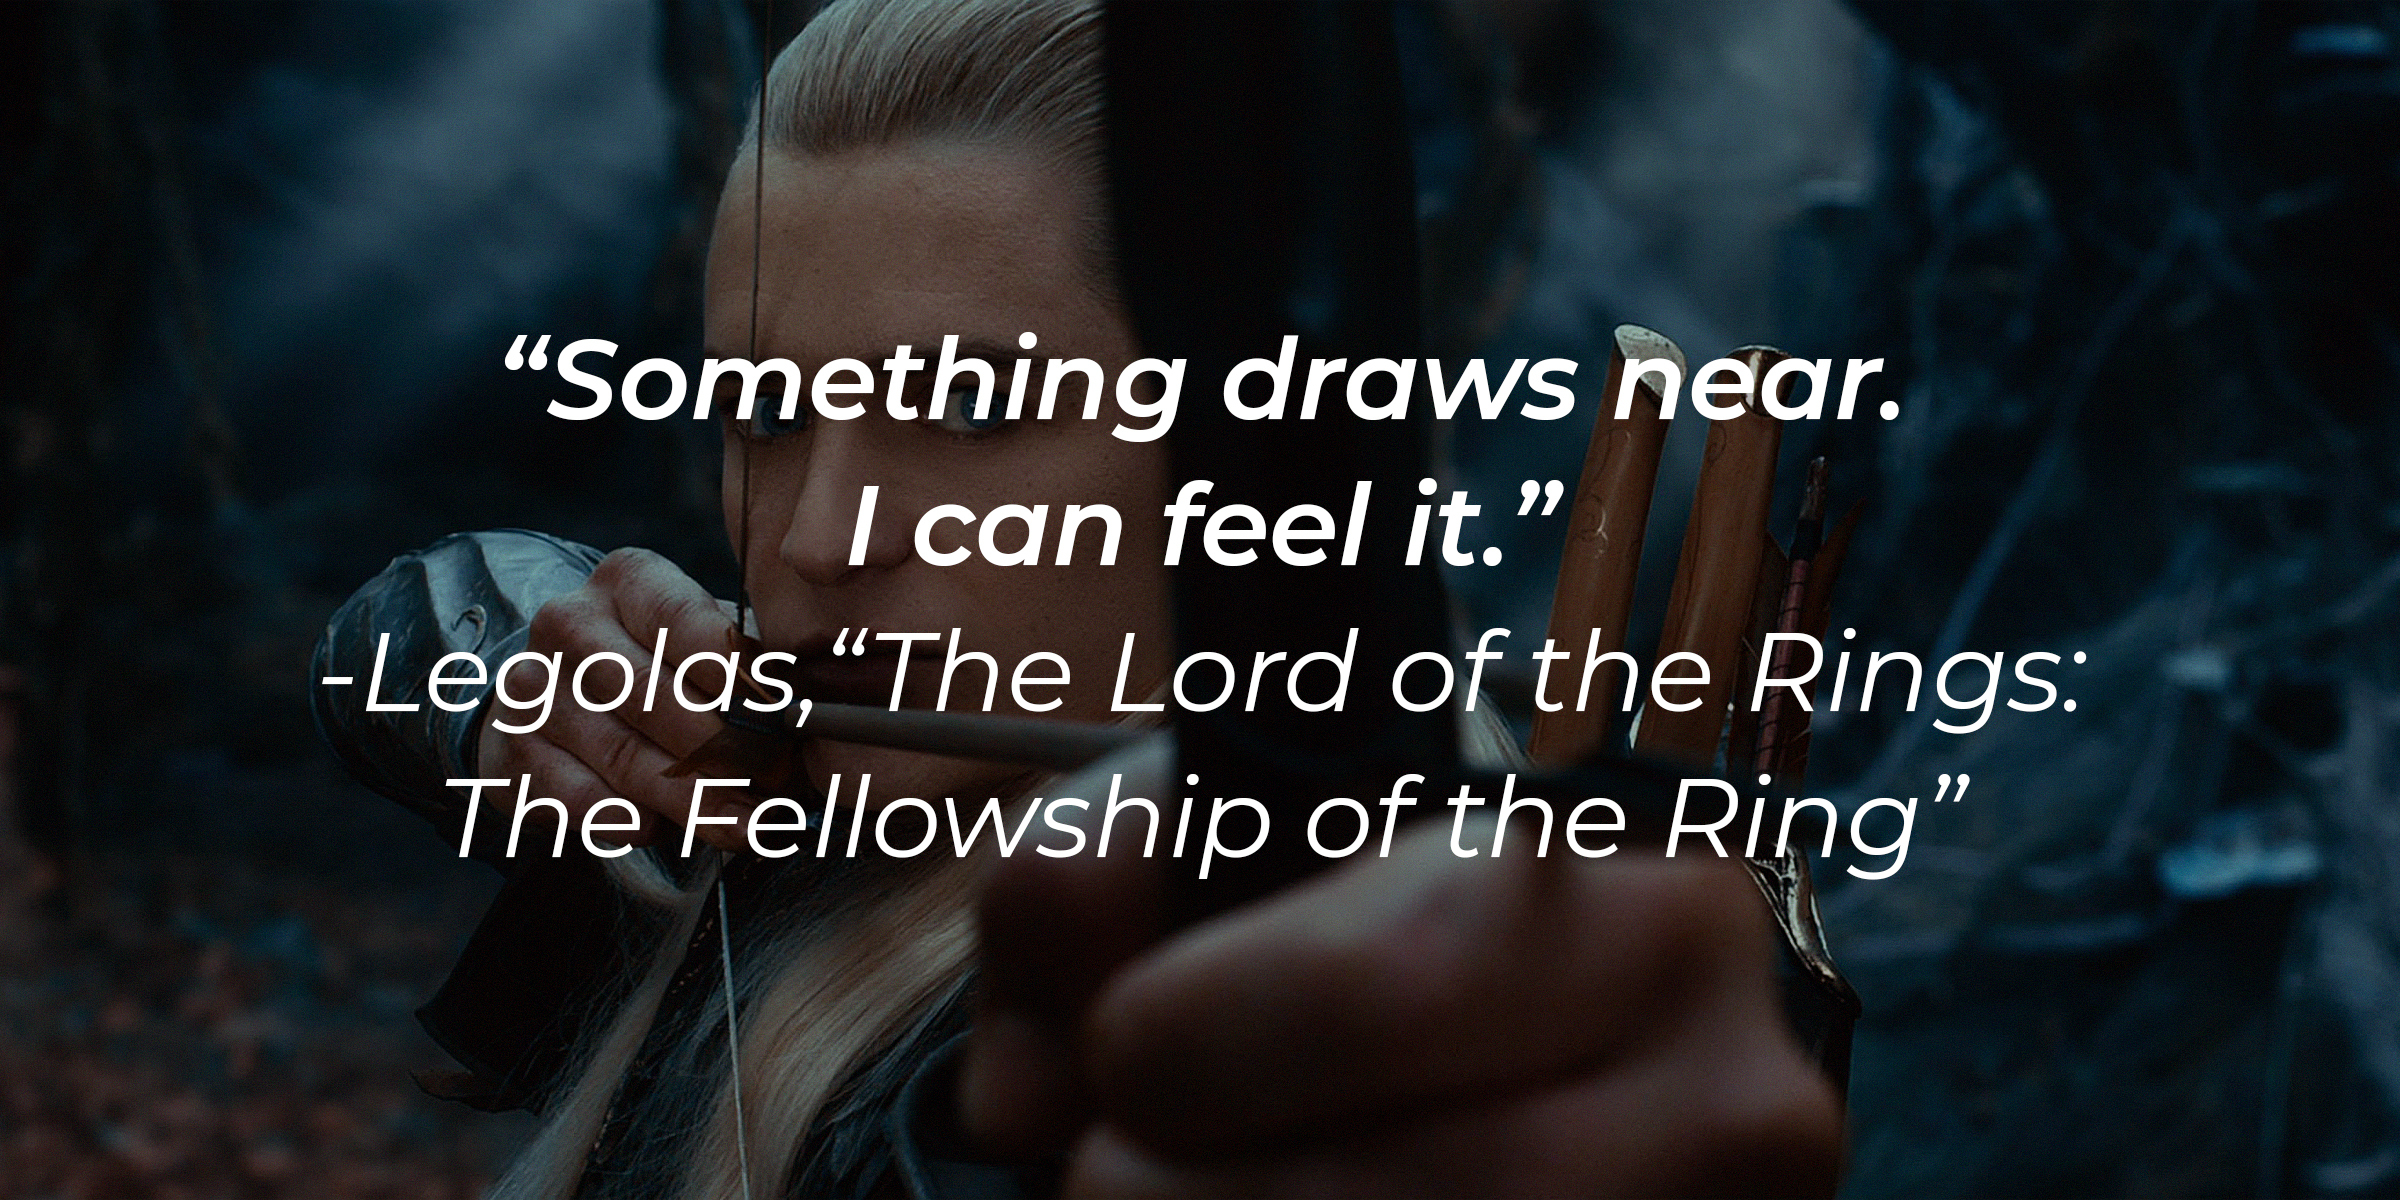 Legolas with his quote: "Something draws near. I can feel it." | Source: Facebook.com/lordoftheringstrilogy